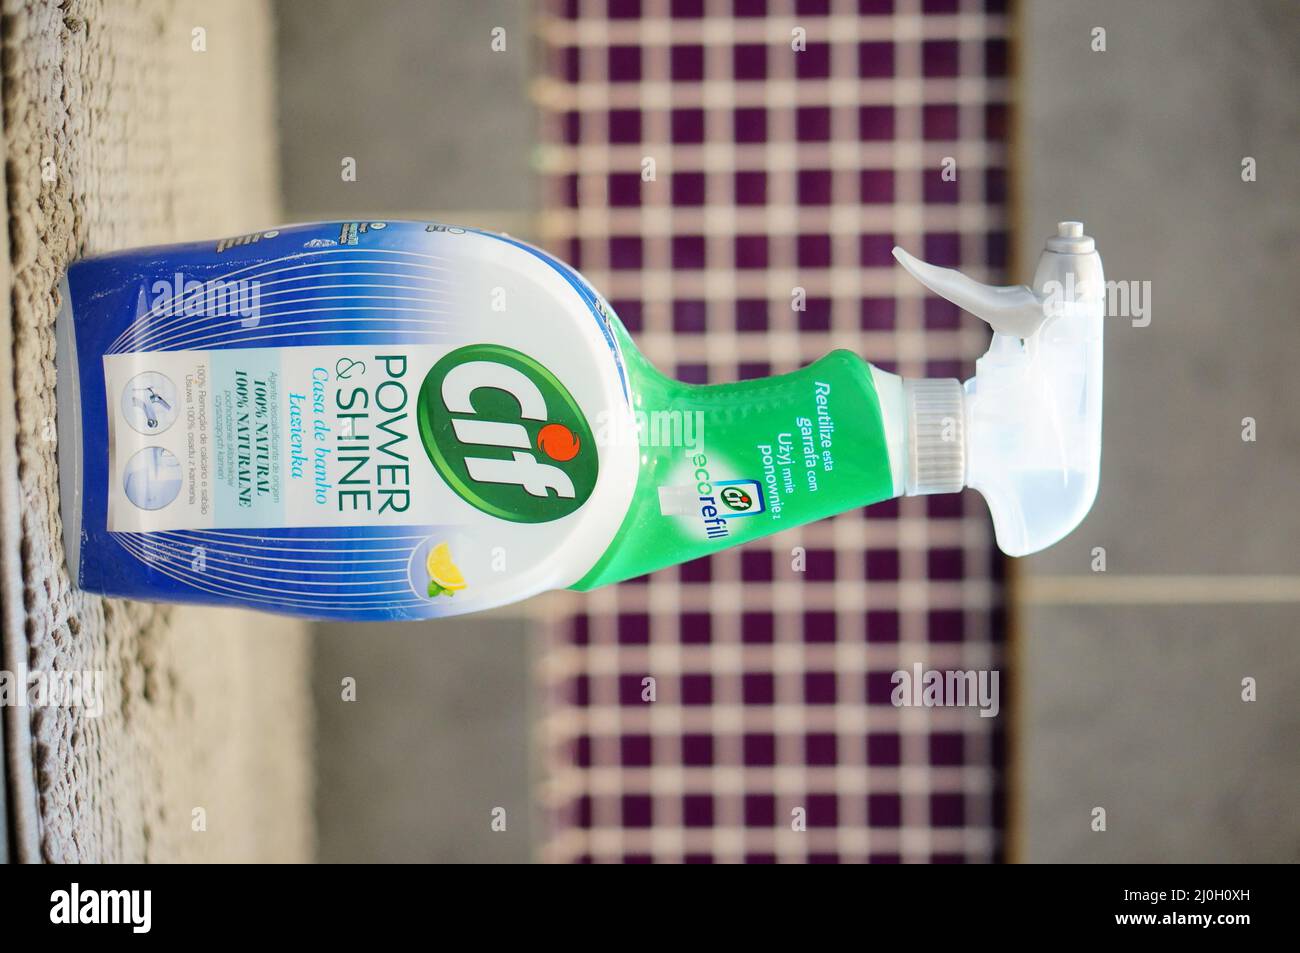 POZNAN, POLAND - Nov 25, 2017: The Cif Cream cleaning product for kitchen  and bathroom in a plastic bottle Stock Photo - Alamy